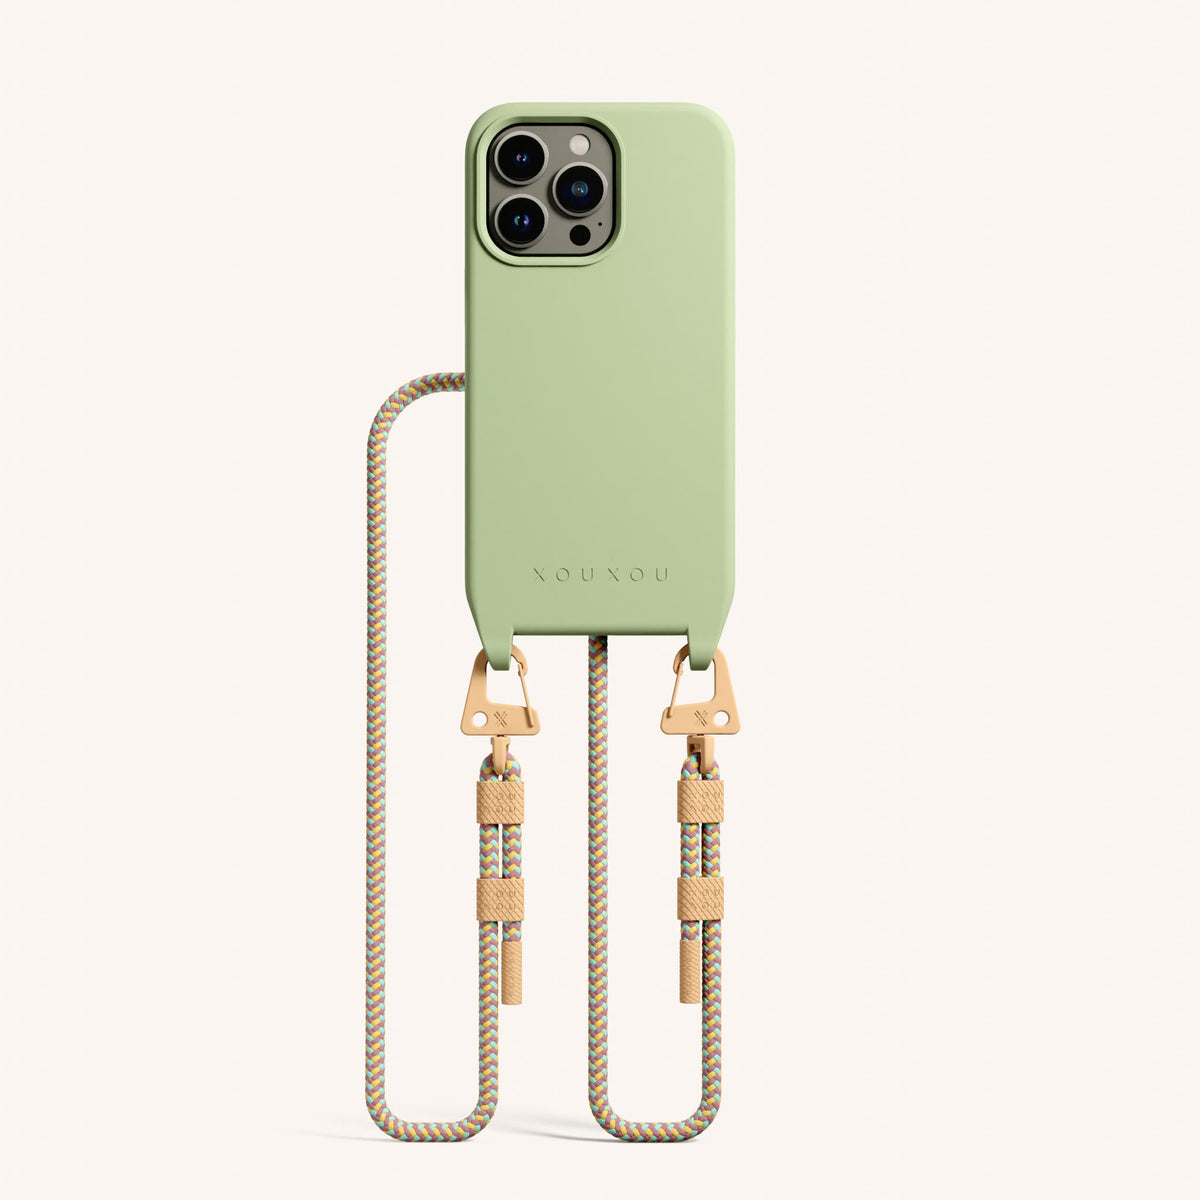 Phone Necklace with Carabiner Rope for iPhone 13 Pro with MagSafe in Light Olive + Palm Springs Total View | XOUXOU #phone model_iphone 13 pro